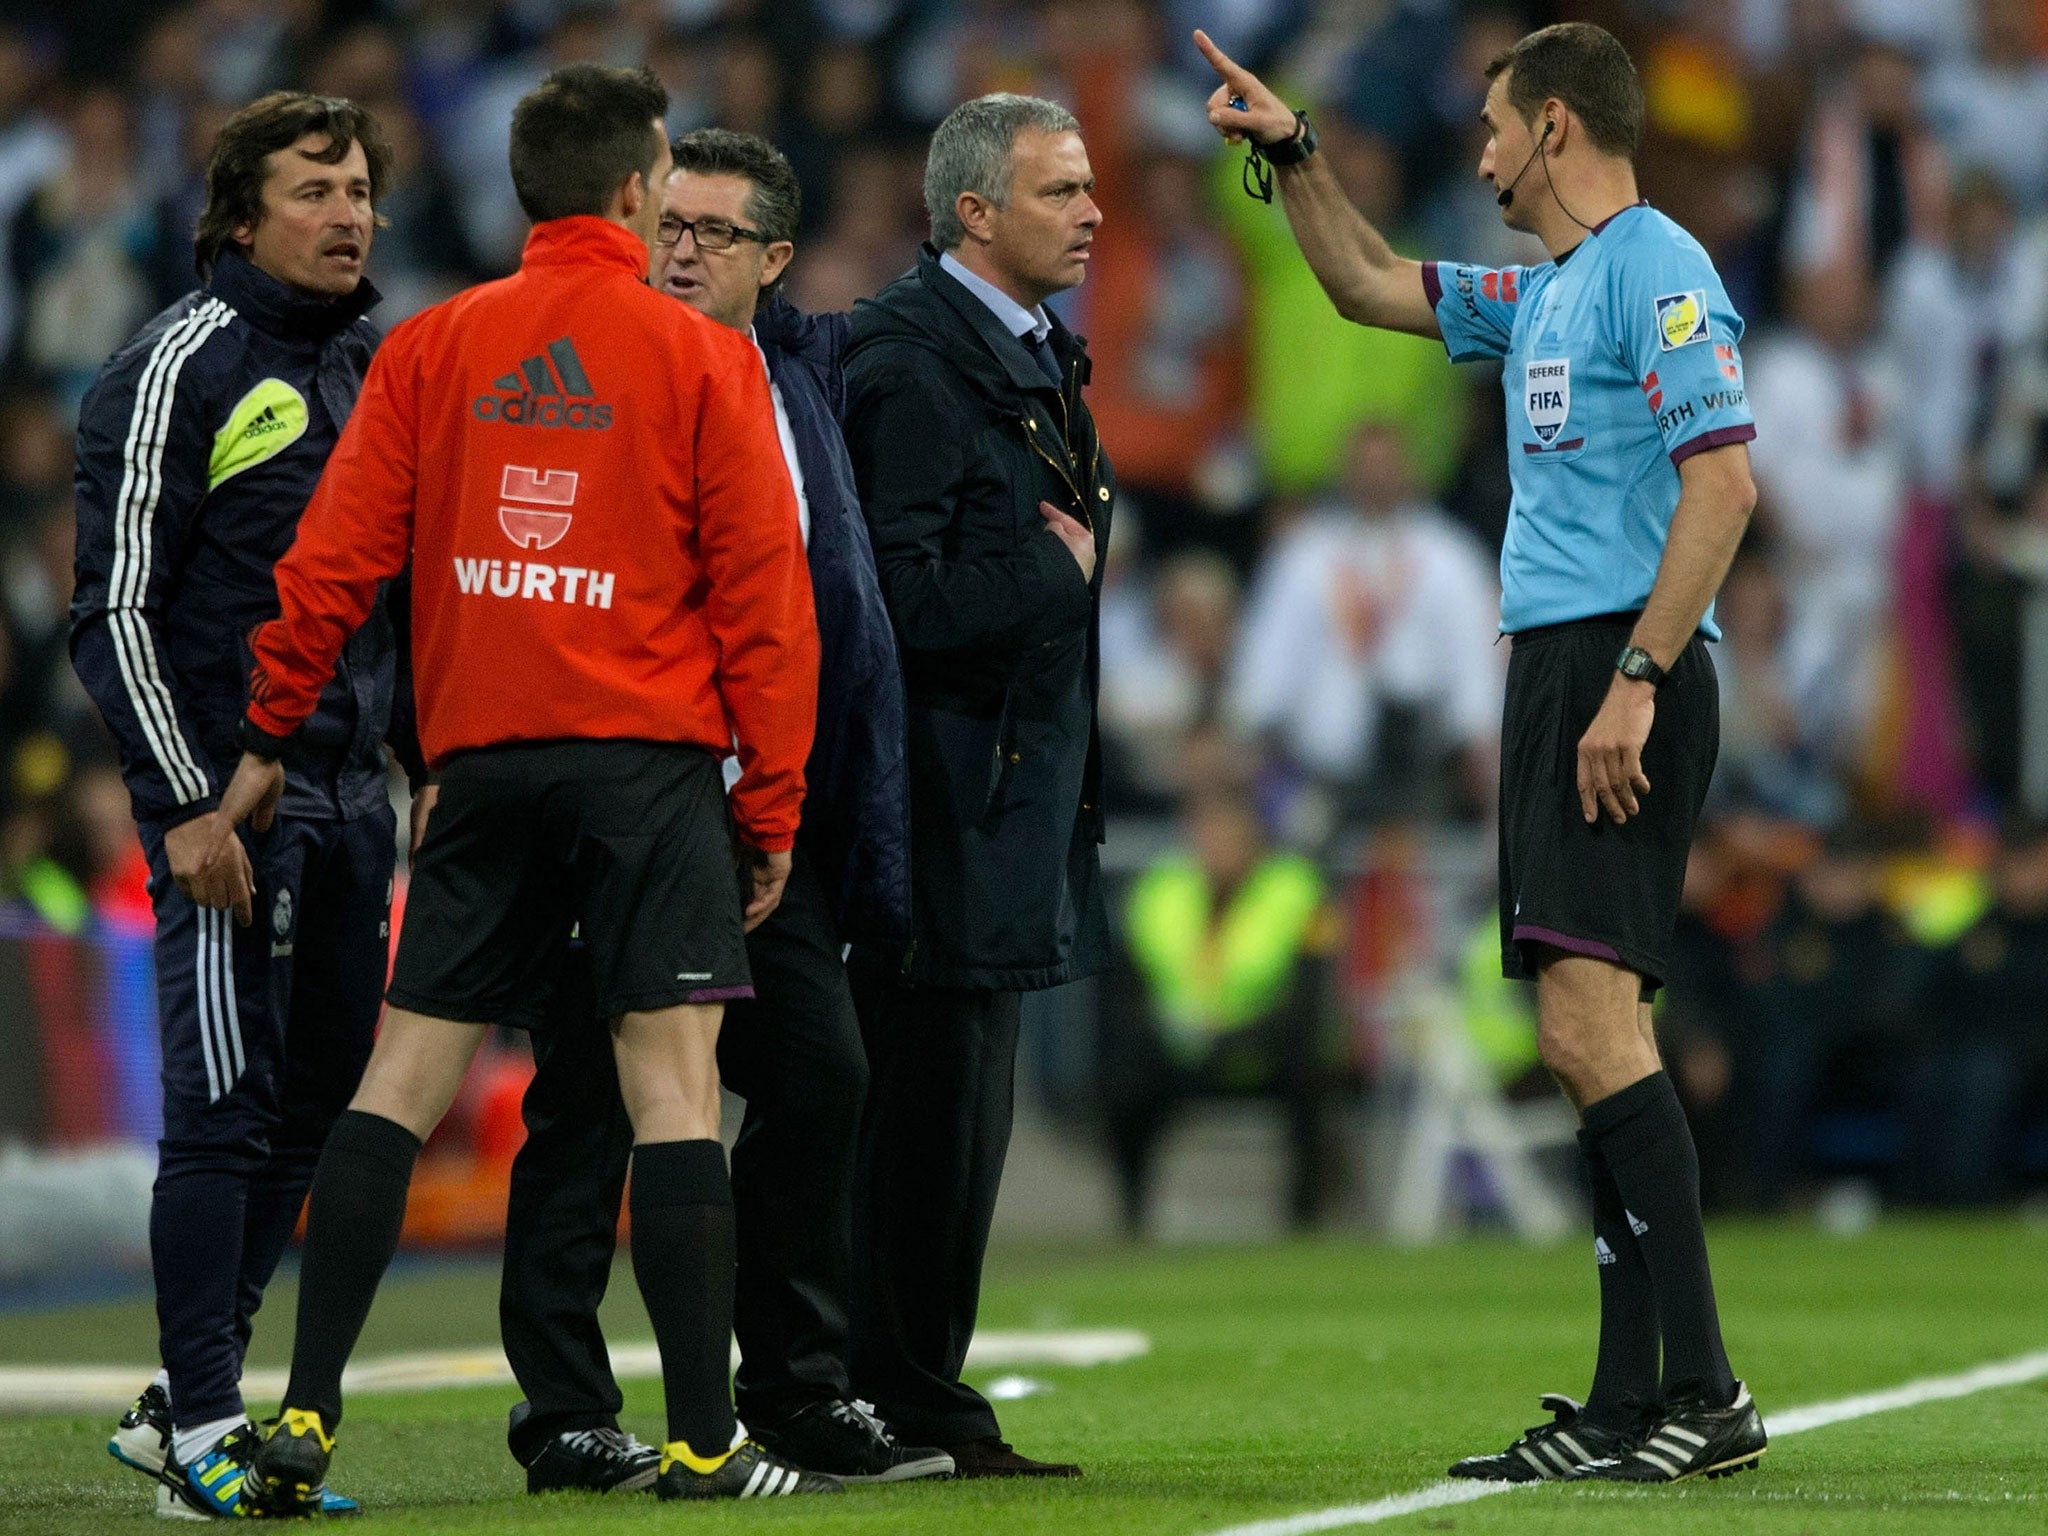 Referee Clos Gomez tells Jose Mourinho to leave the pitch